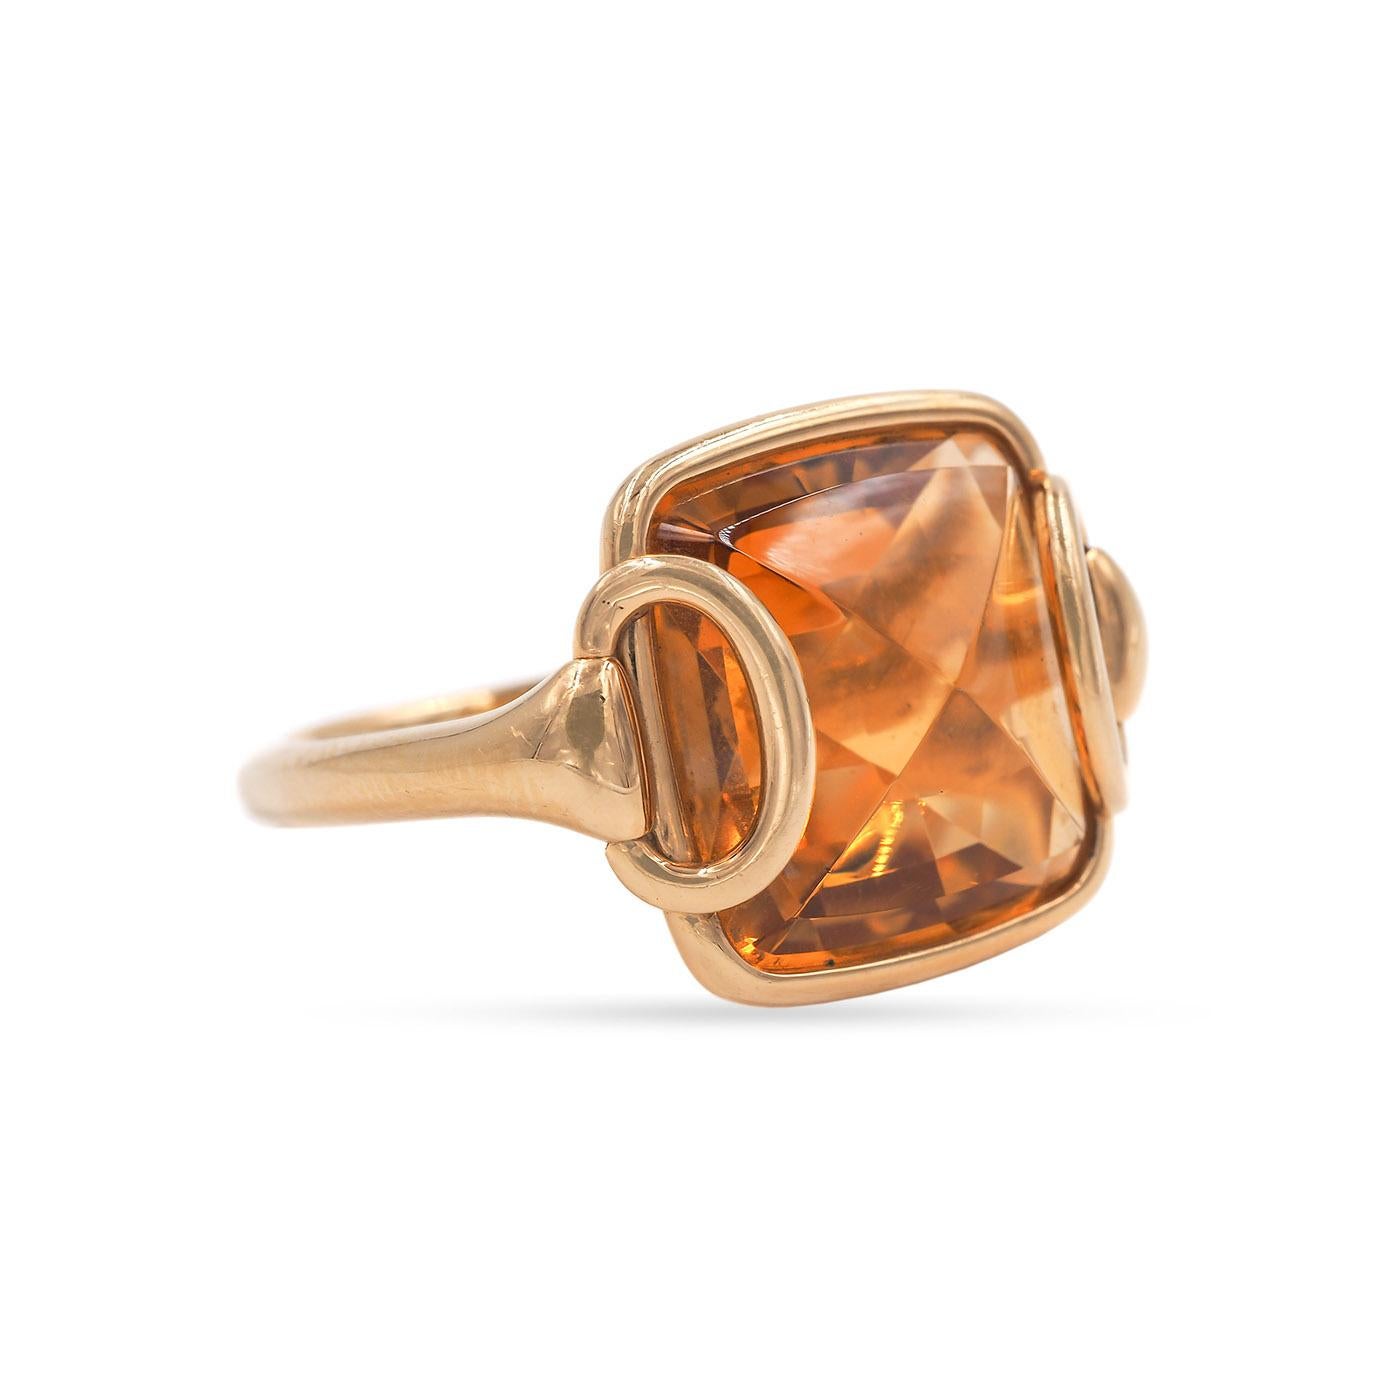 Contemporary 15 Carat Citrine Ring by Hermès composed of 18k yellow gold. The citrine is a double pyramidal cabochon, with horse-bit shoulder details. Weighs 14.5 grams.
Stamped 'HÈRMES', French hallmarks.